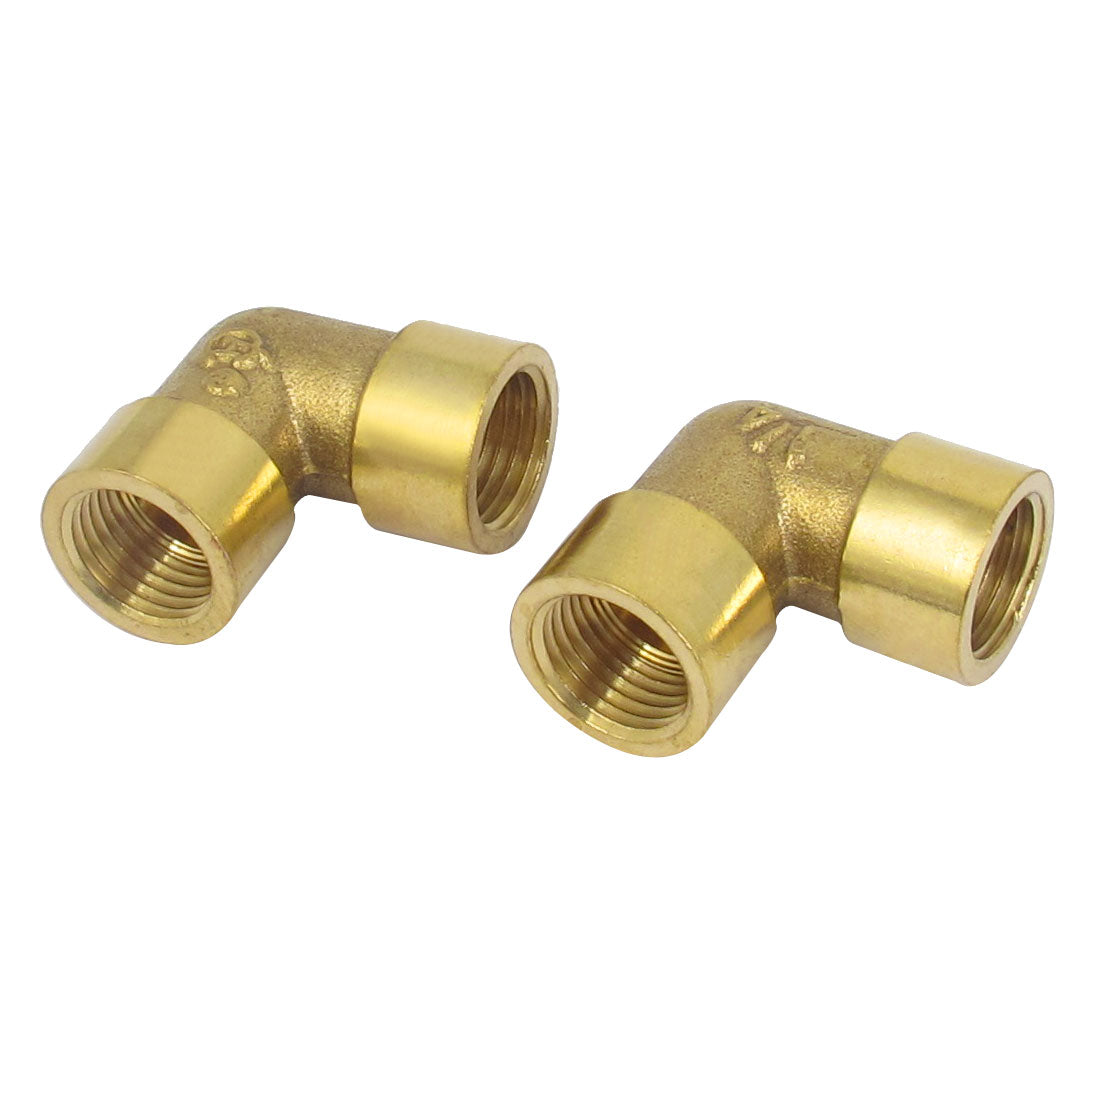 uxcell Uxcell 1/4BSP Female to Female Metal L Shape Elbow Hose Pipe Tube Fitting Connector 2pcs